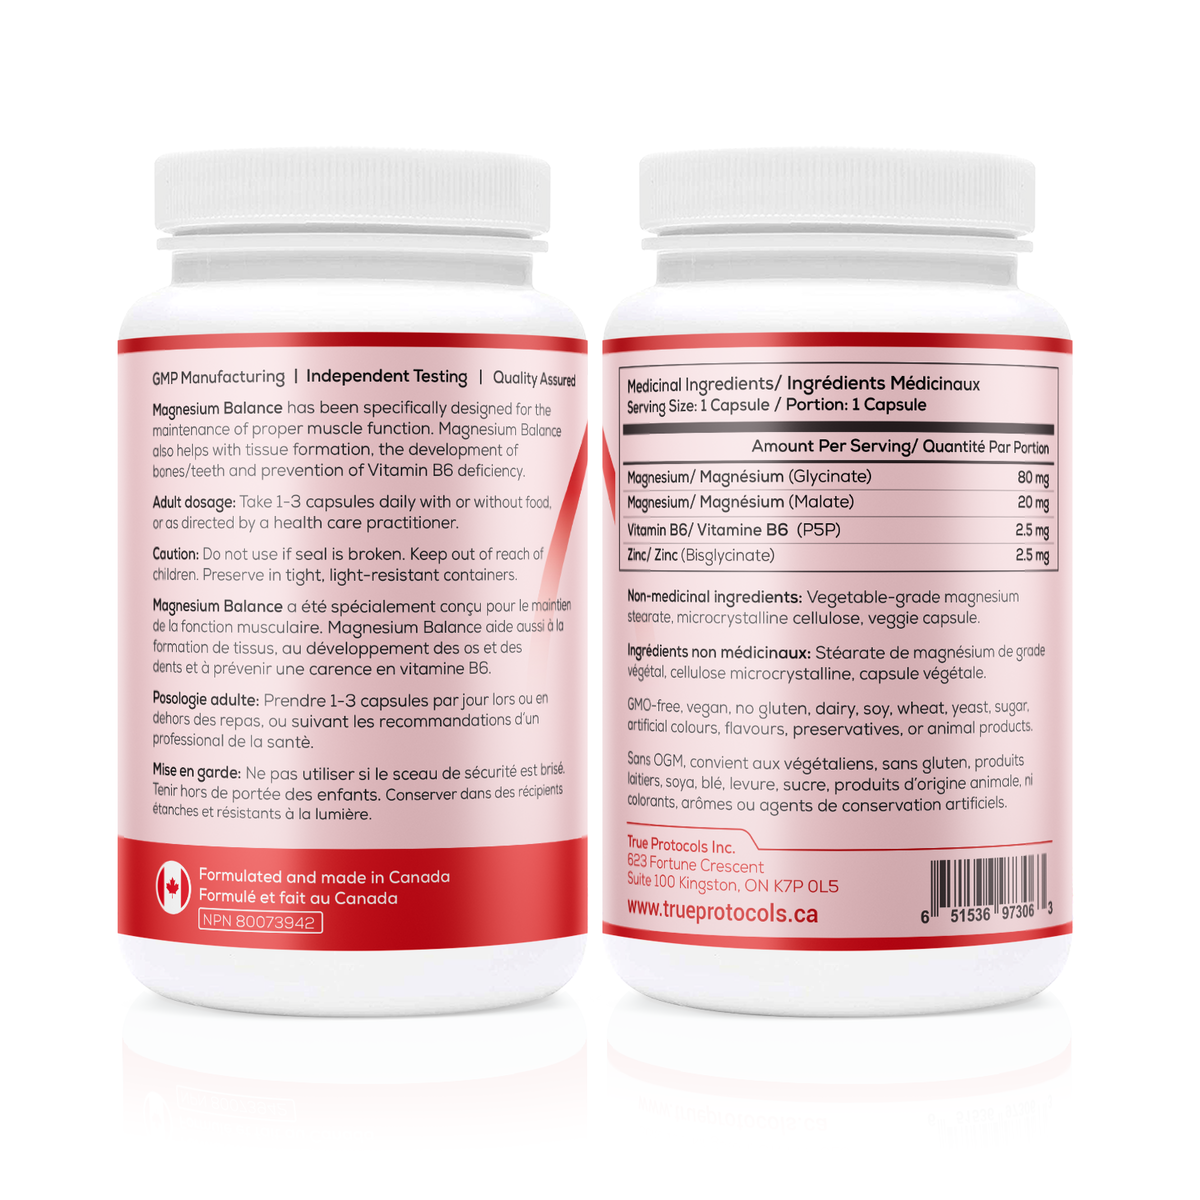 Muscle Protocol+ - Magnesium Balance, Vitamin D-K2 Balance &amp; Mitochondria Balance - Bioavailable Capsules for Optimal Muscle Function, Bone Health, Stress Relief, and Sleep